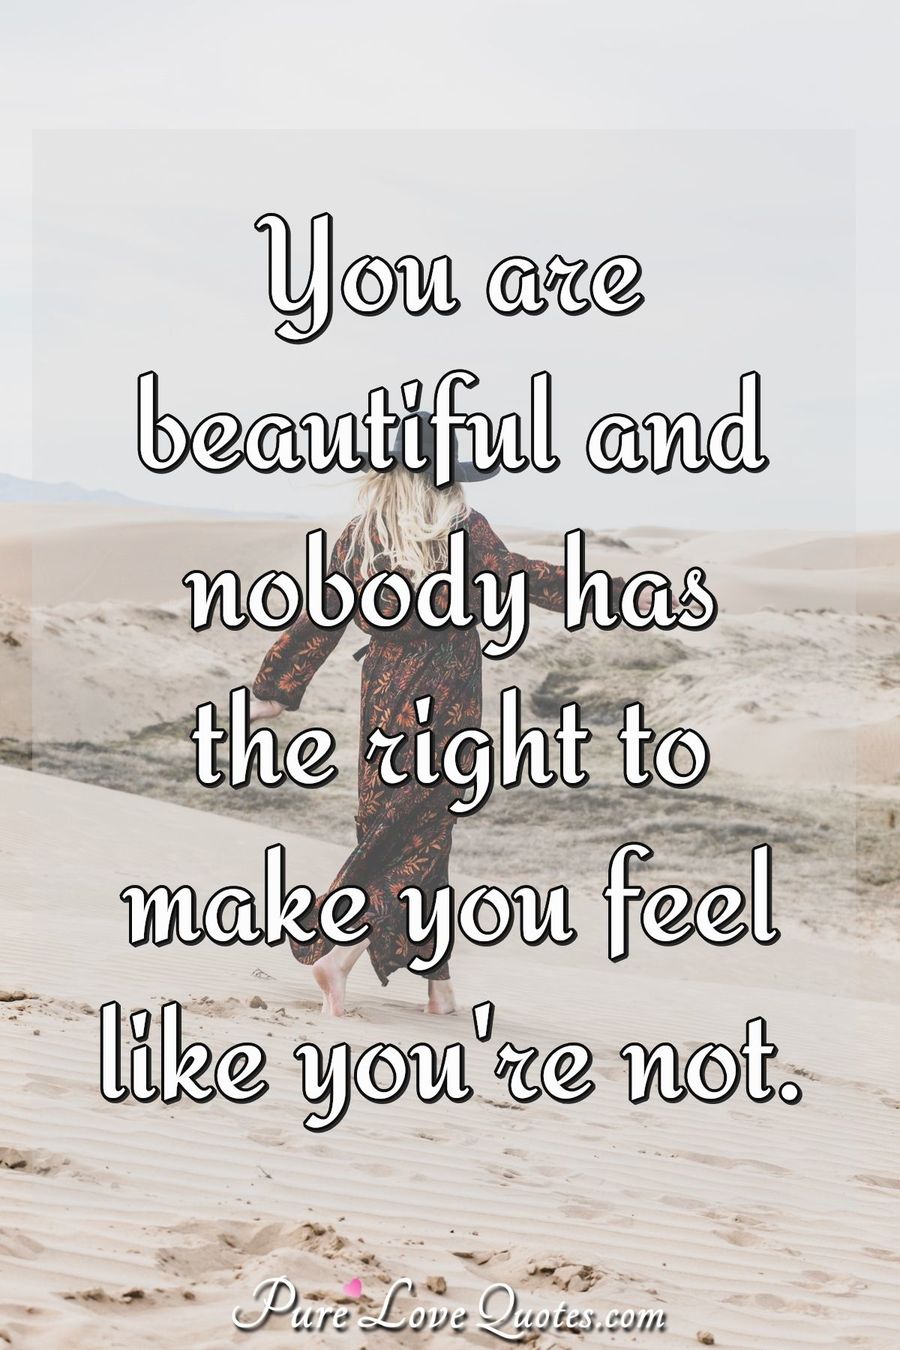 You are beautiful and nobody has the right to make you feel like you're not. - Anonymous